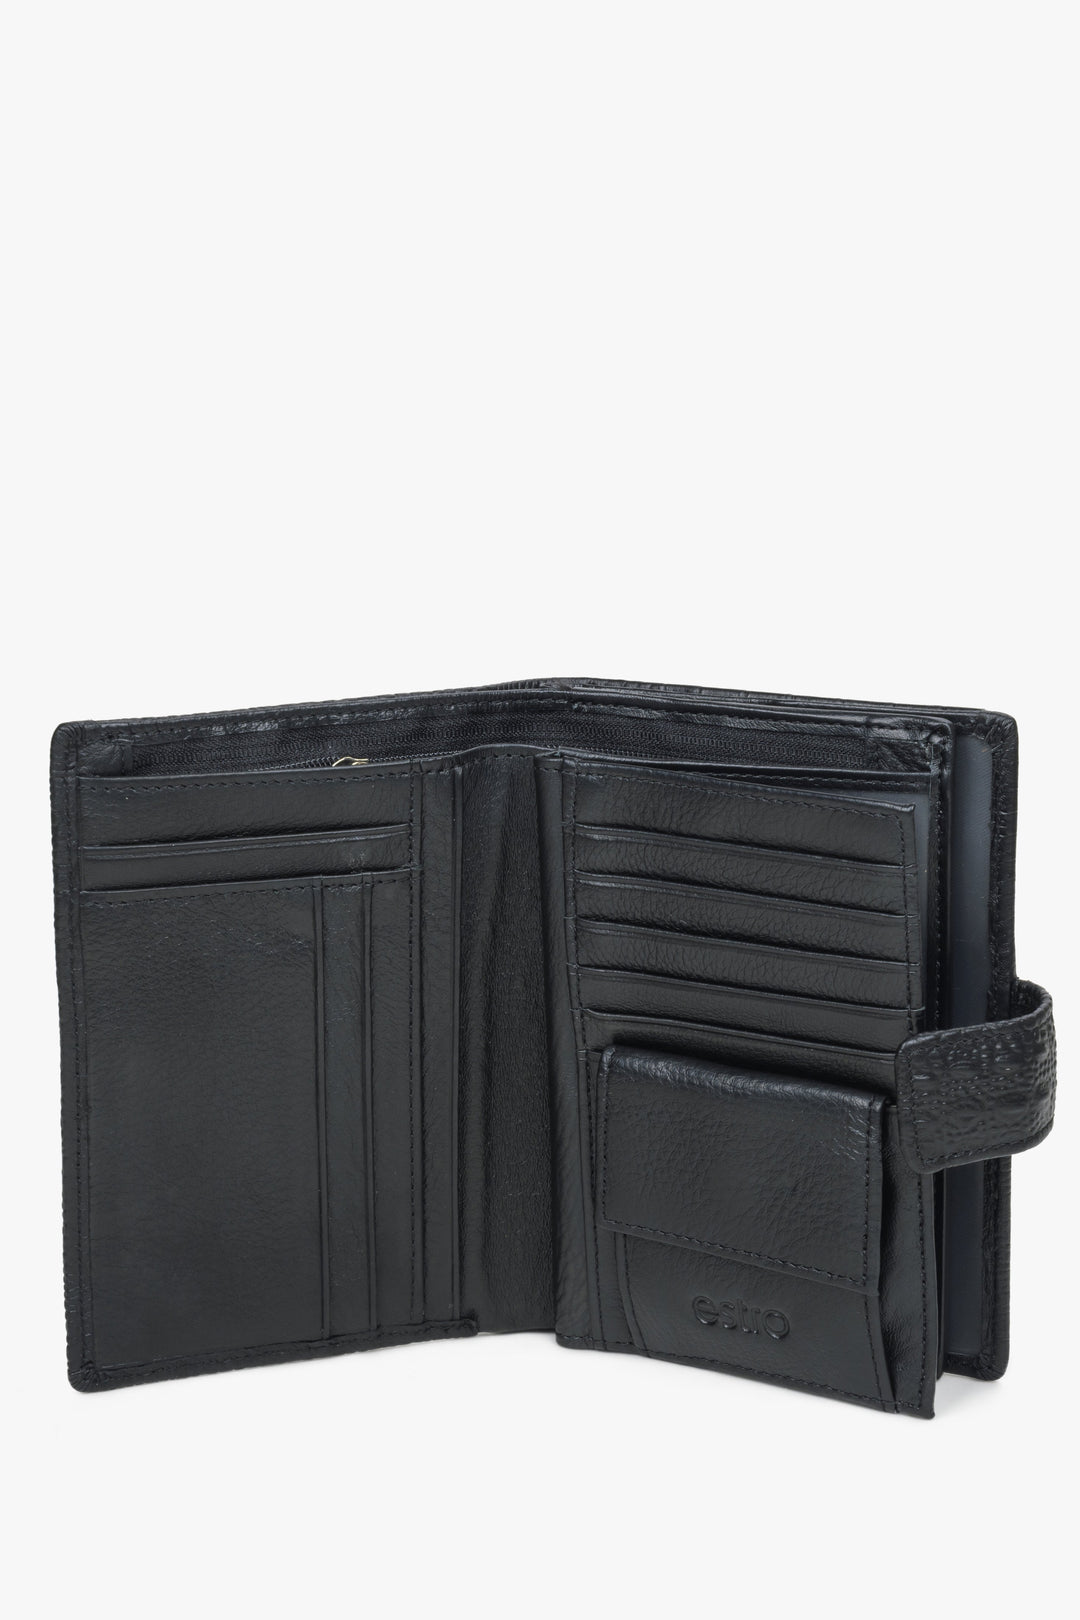 Men's black functional wallet made of genuine leather by Estro - interior of the wallet.